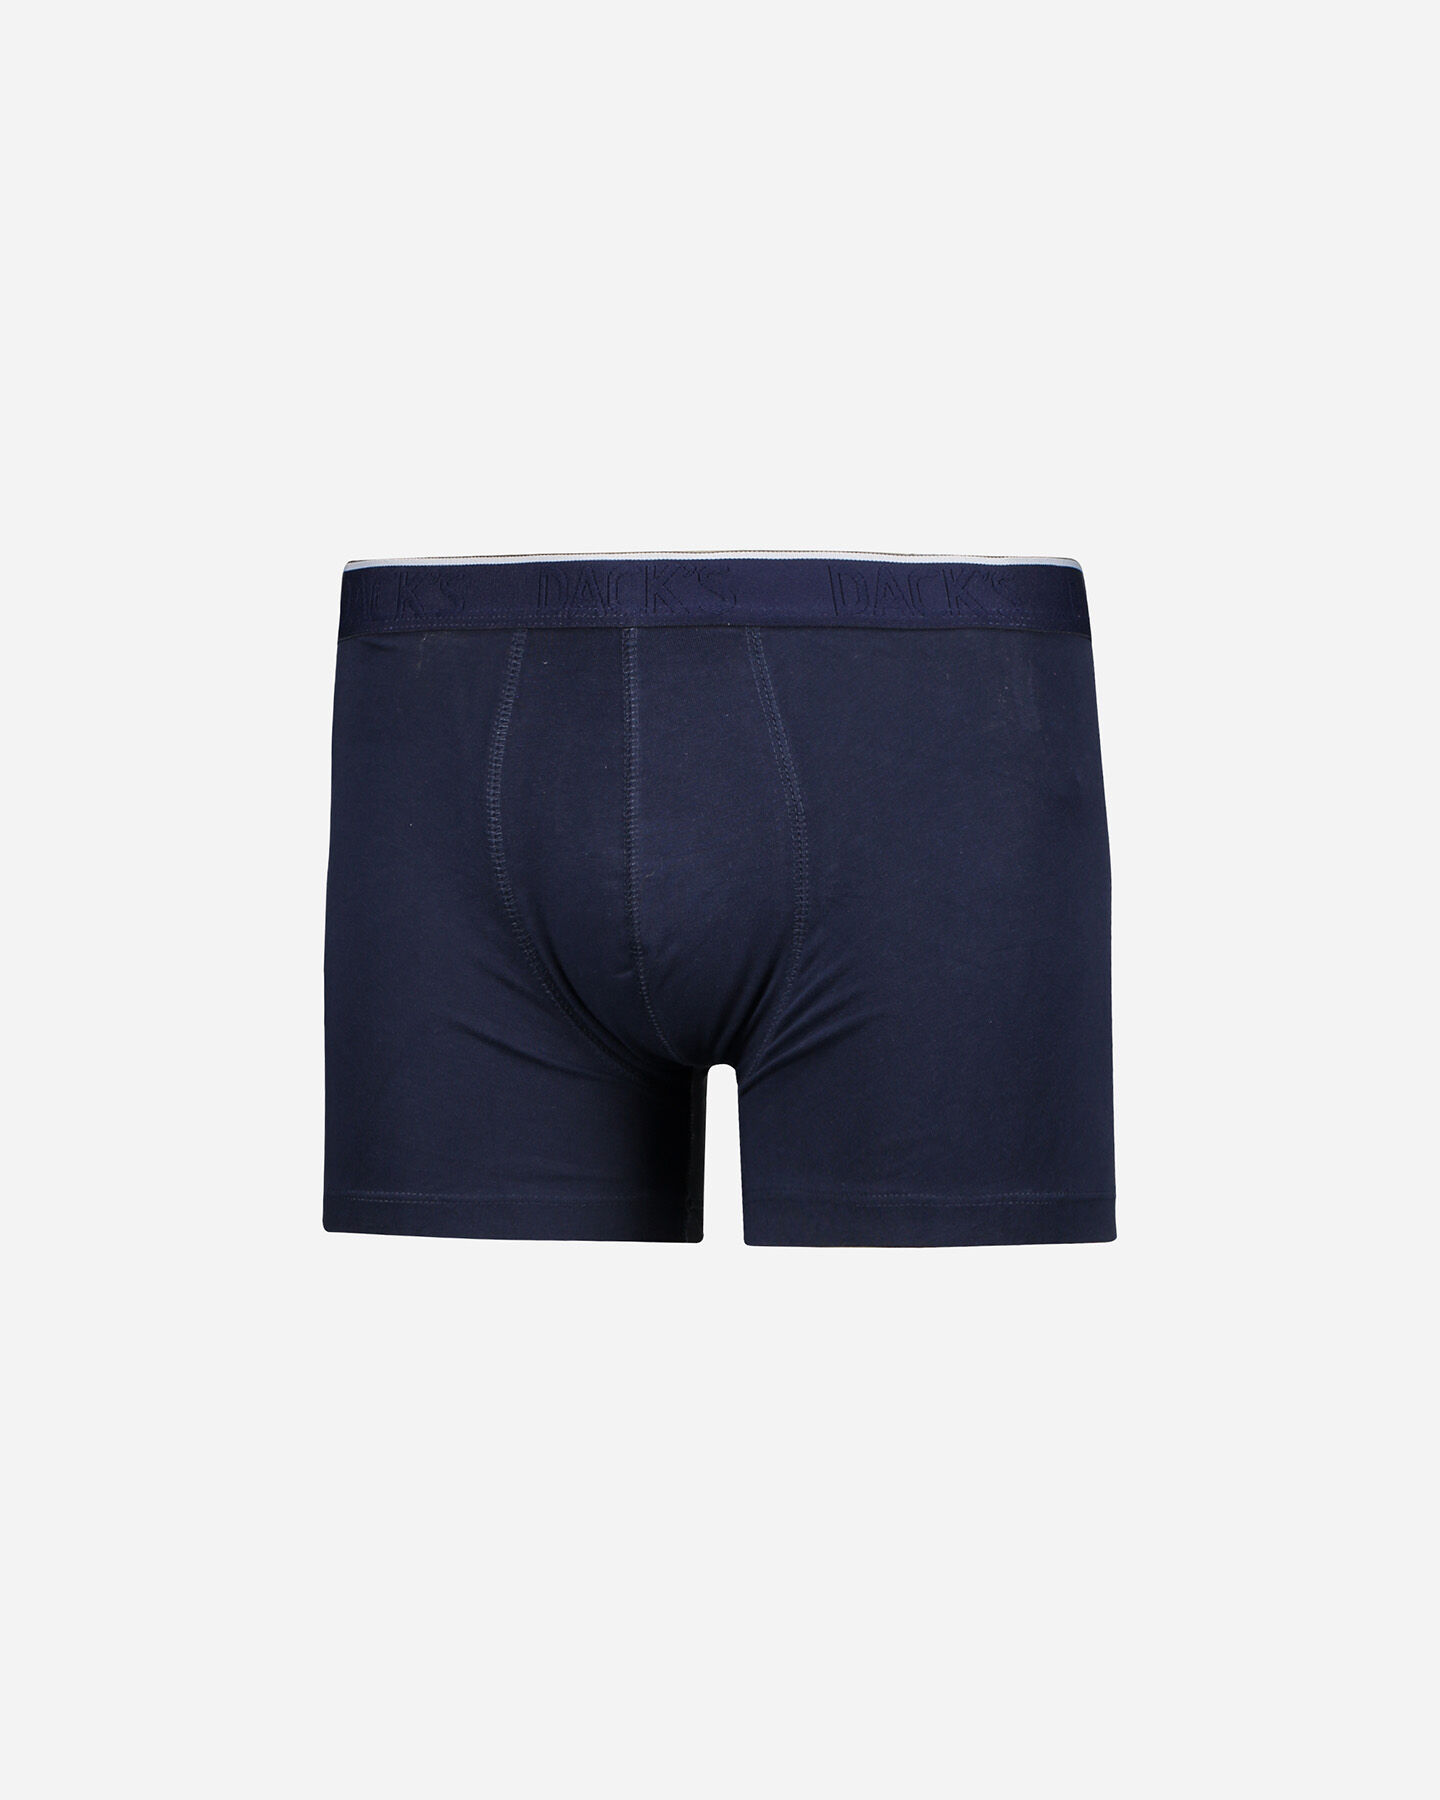  Intimo DACK'S BIPACK BASIC BOXER M S4061963|519/050|S scatto 1